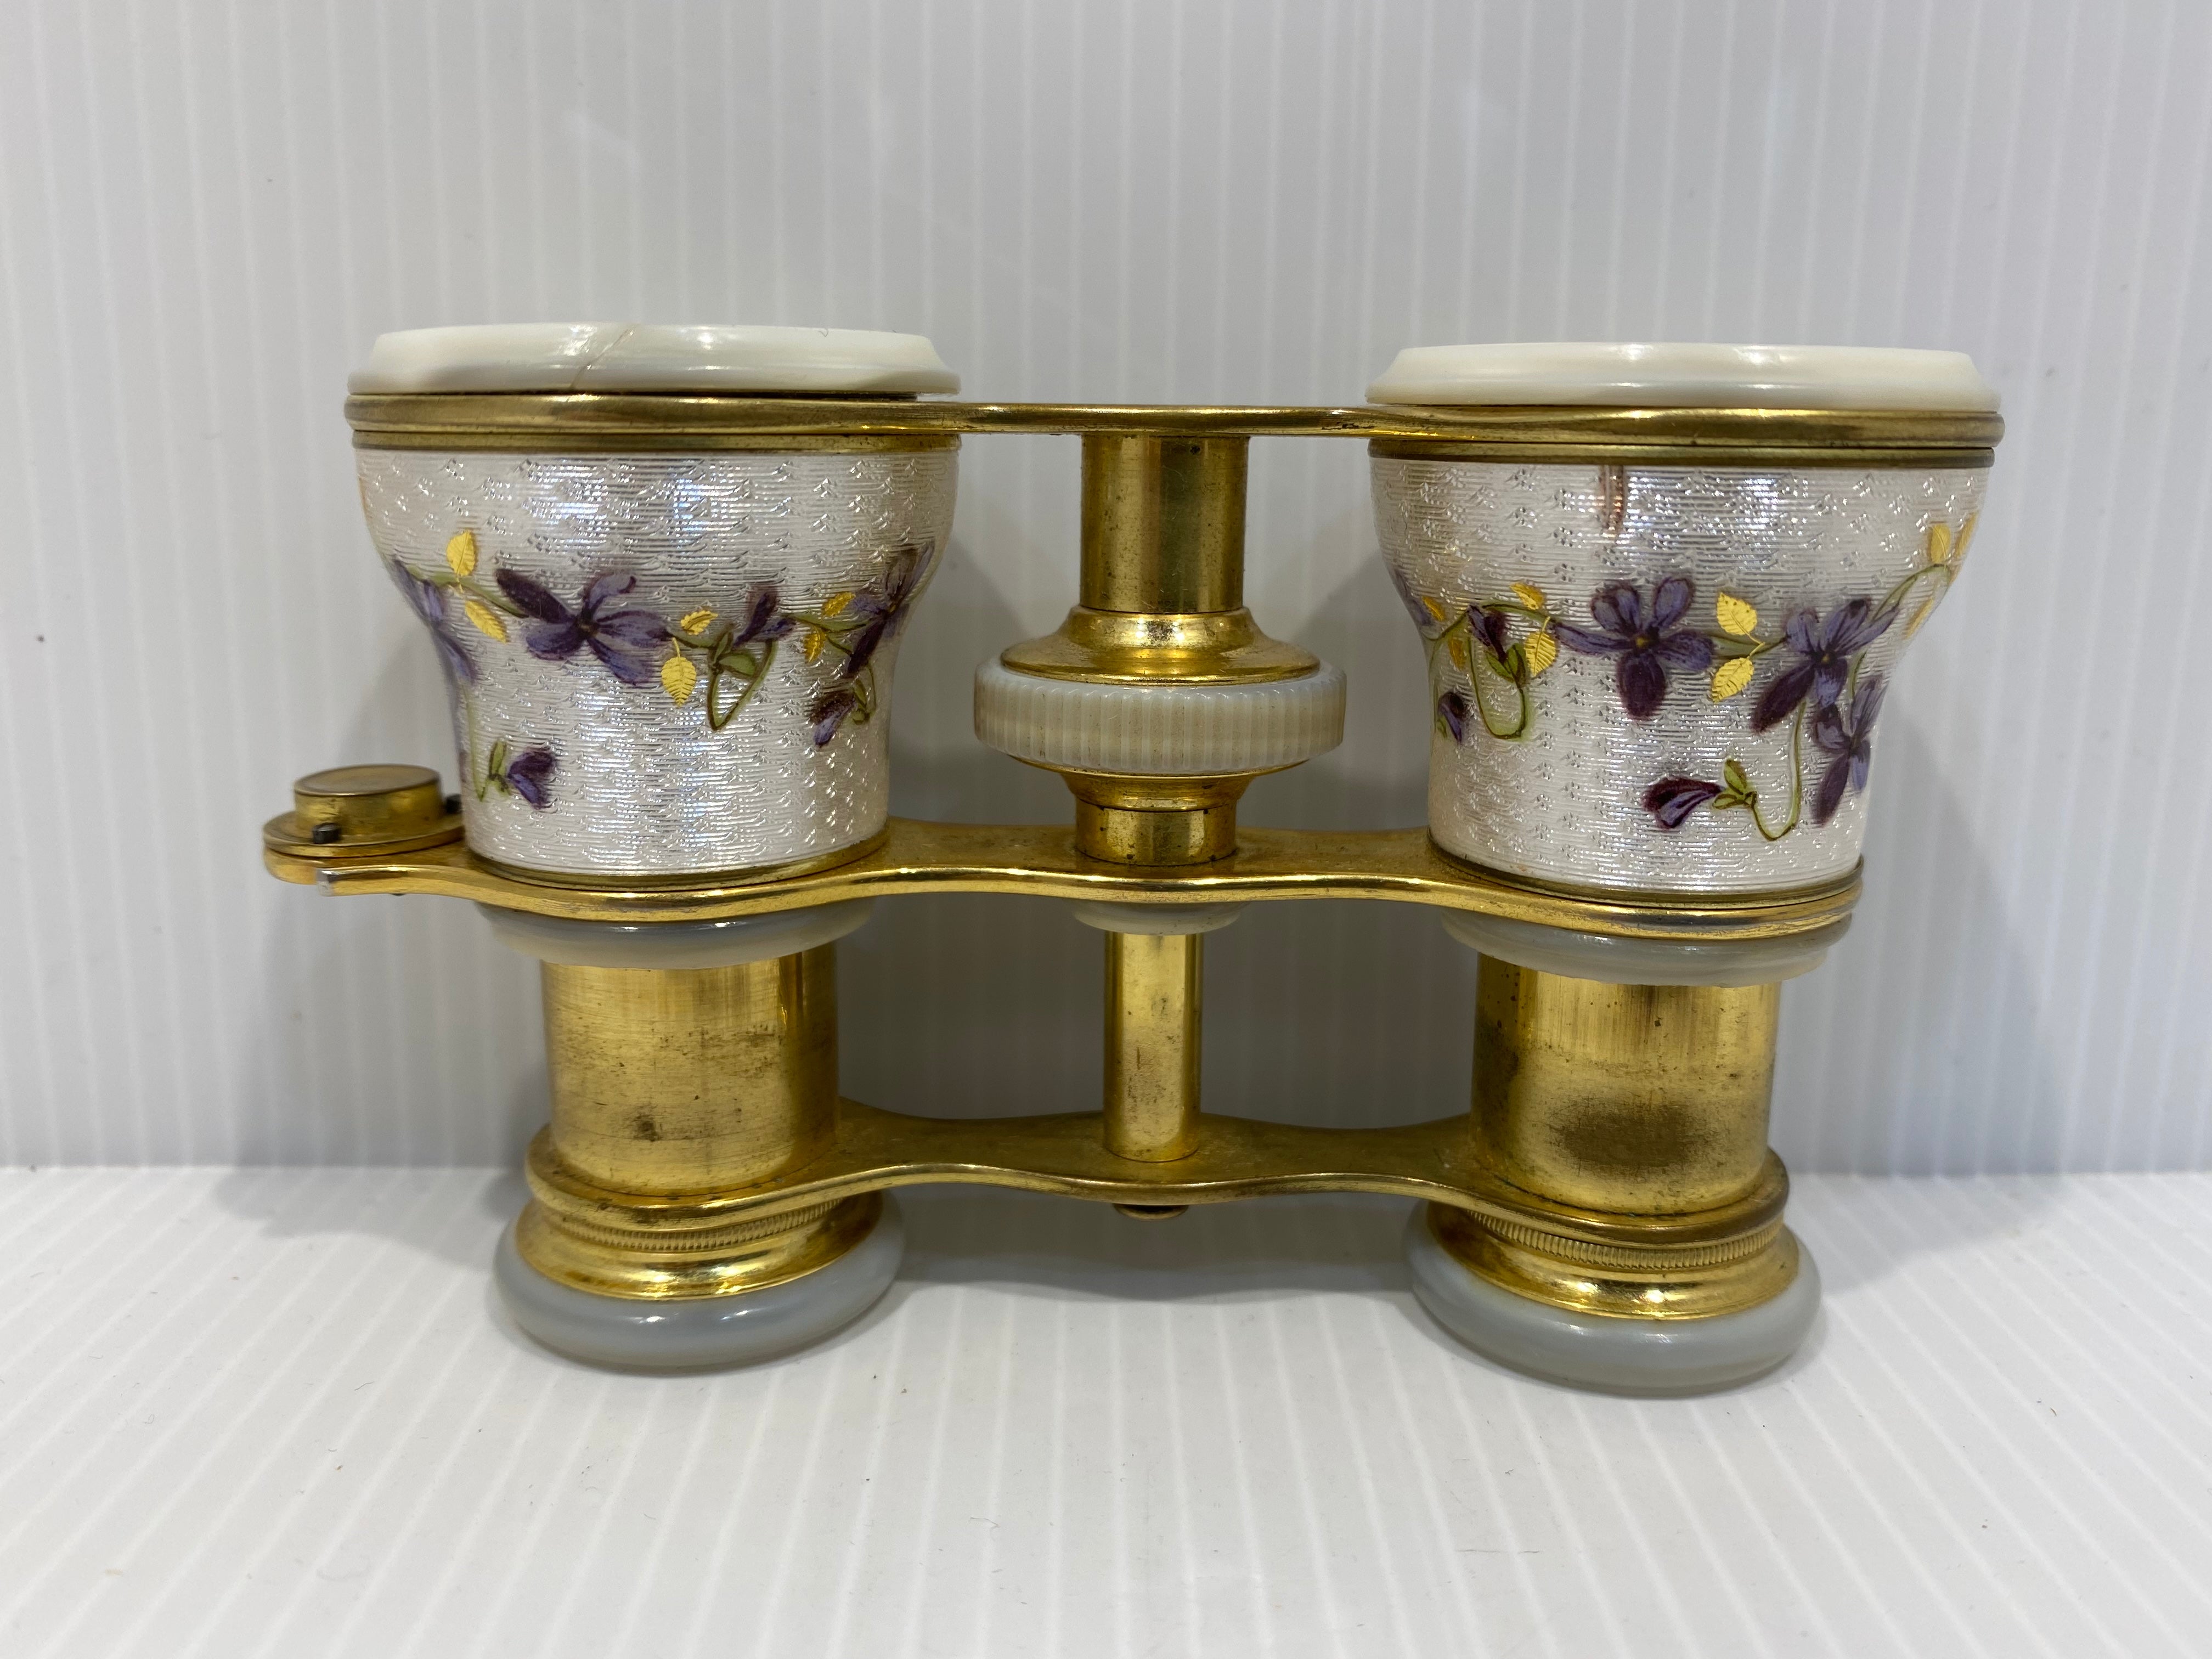 19th century French enamel opera glasses with handle.